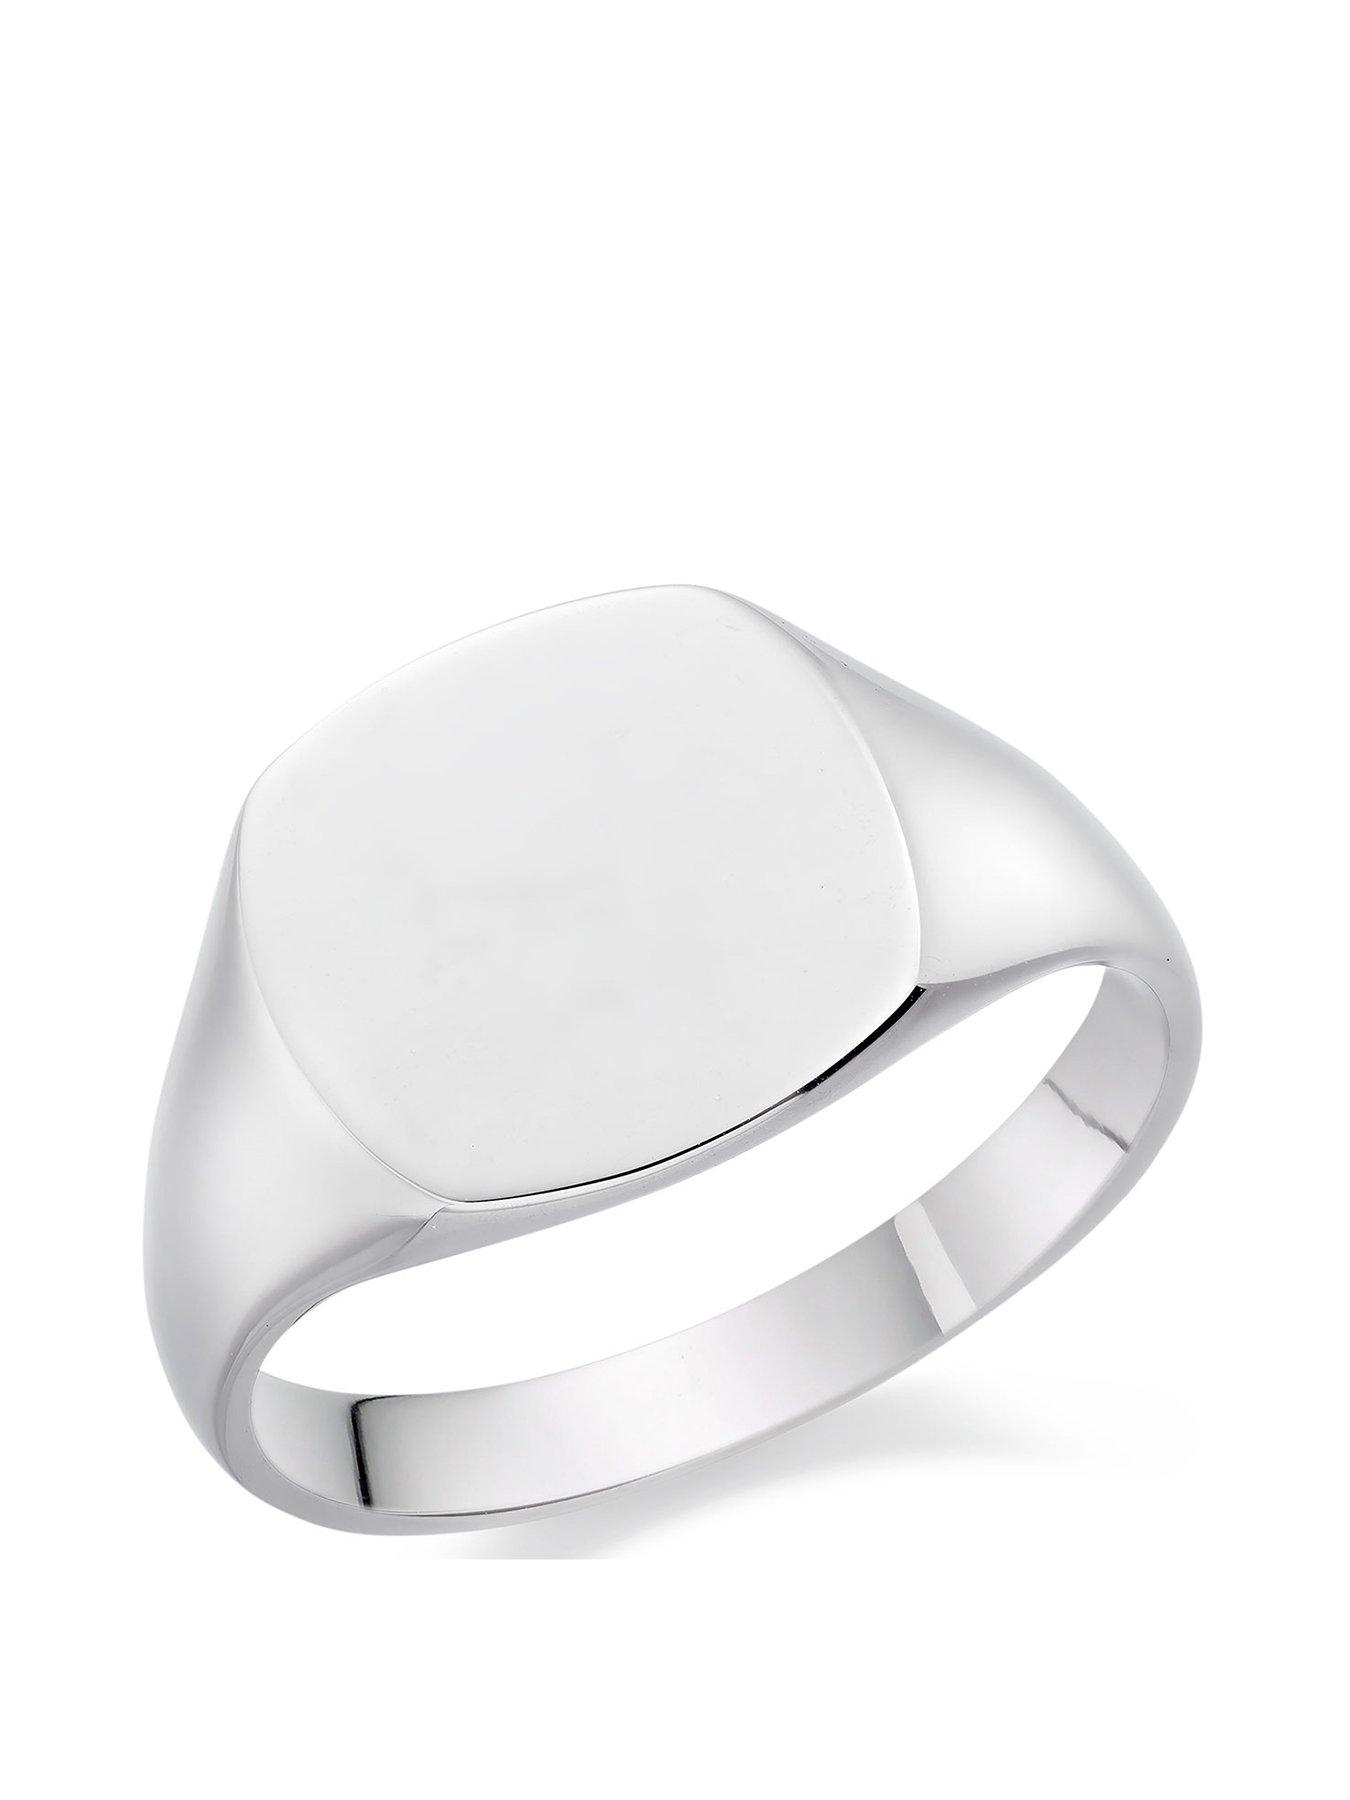 Jewellery & watches White Gold Cushion Signet Ring